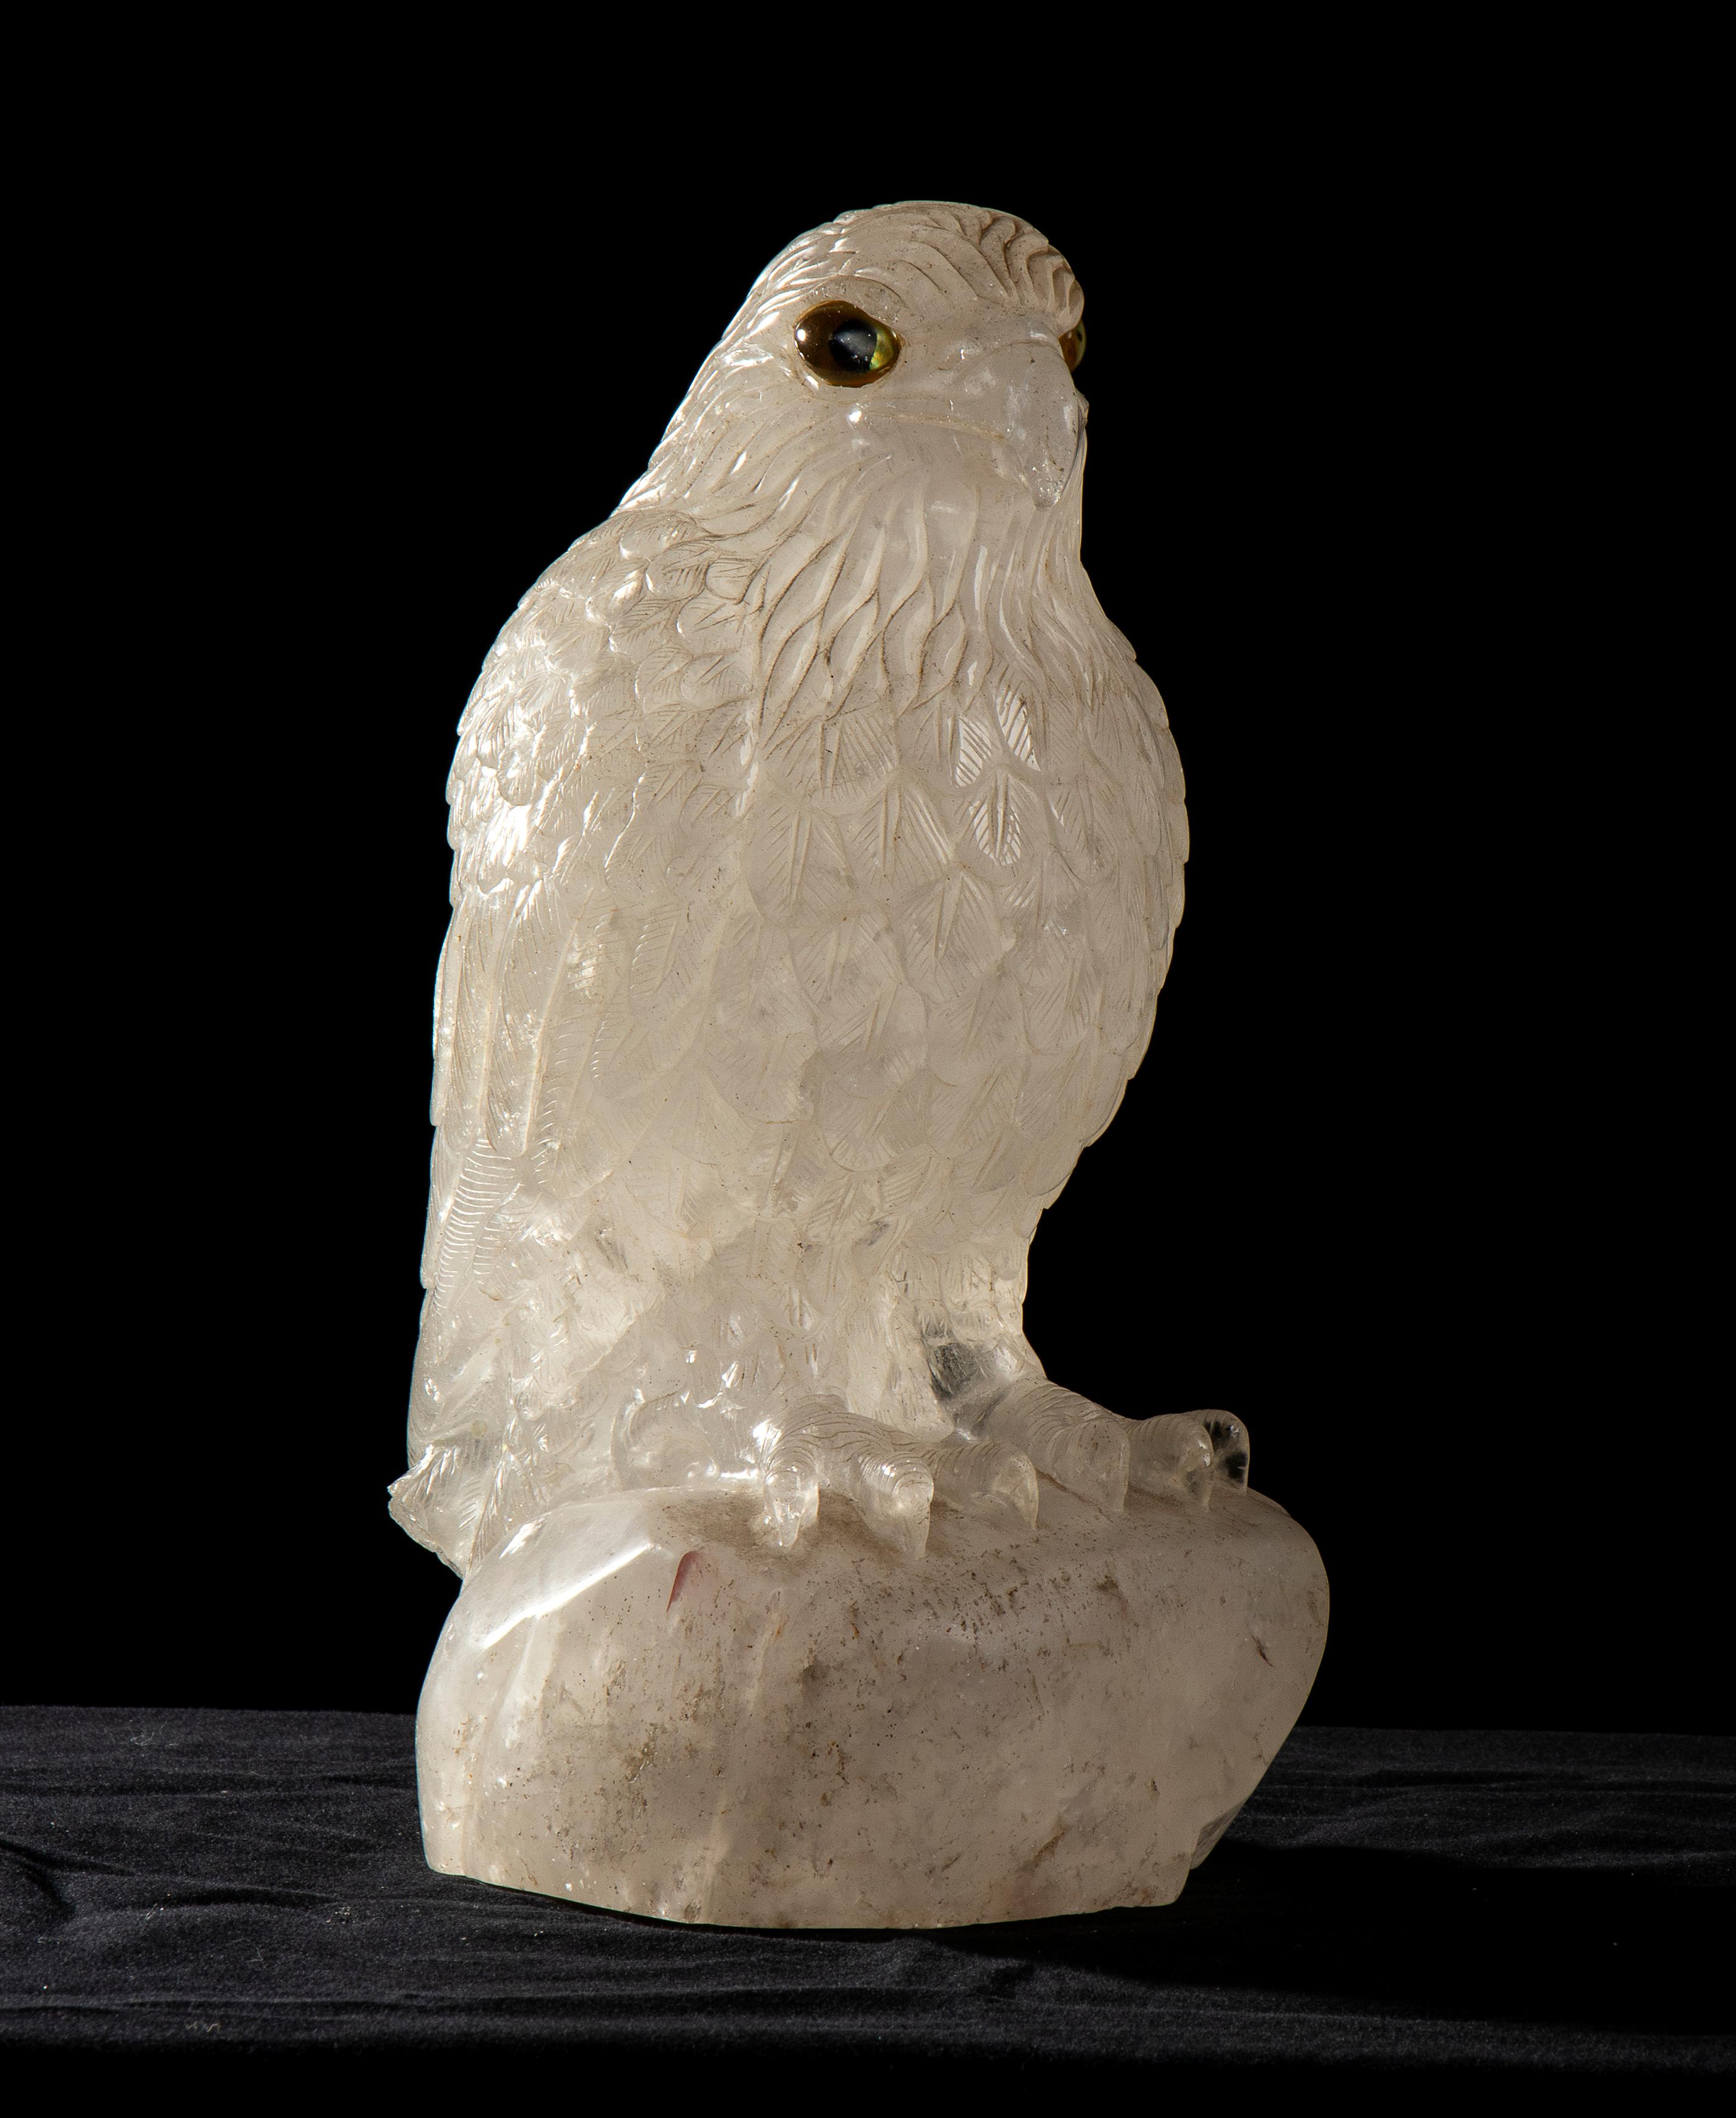 Unknown Figurative Sculpture - Sculpture of Eagle Carved From A Block Of Rock Crystal White Quartz 